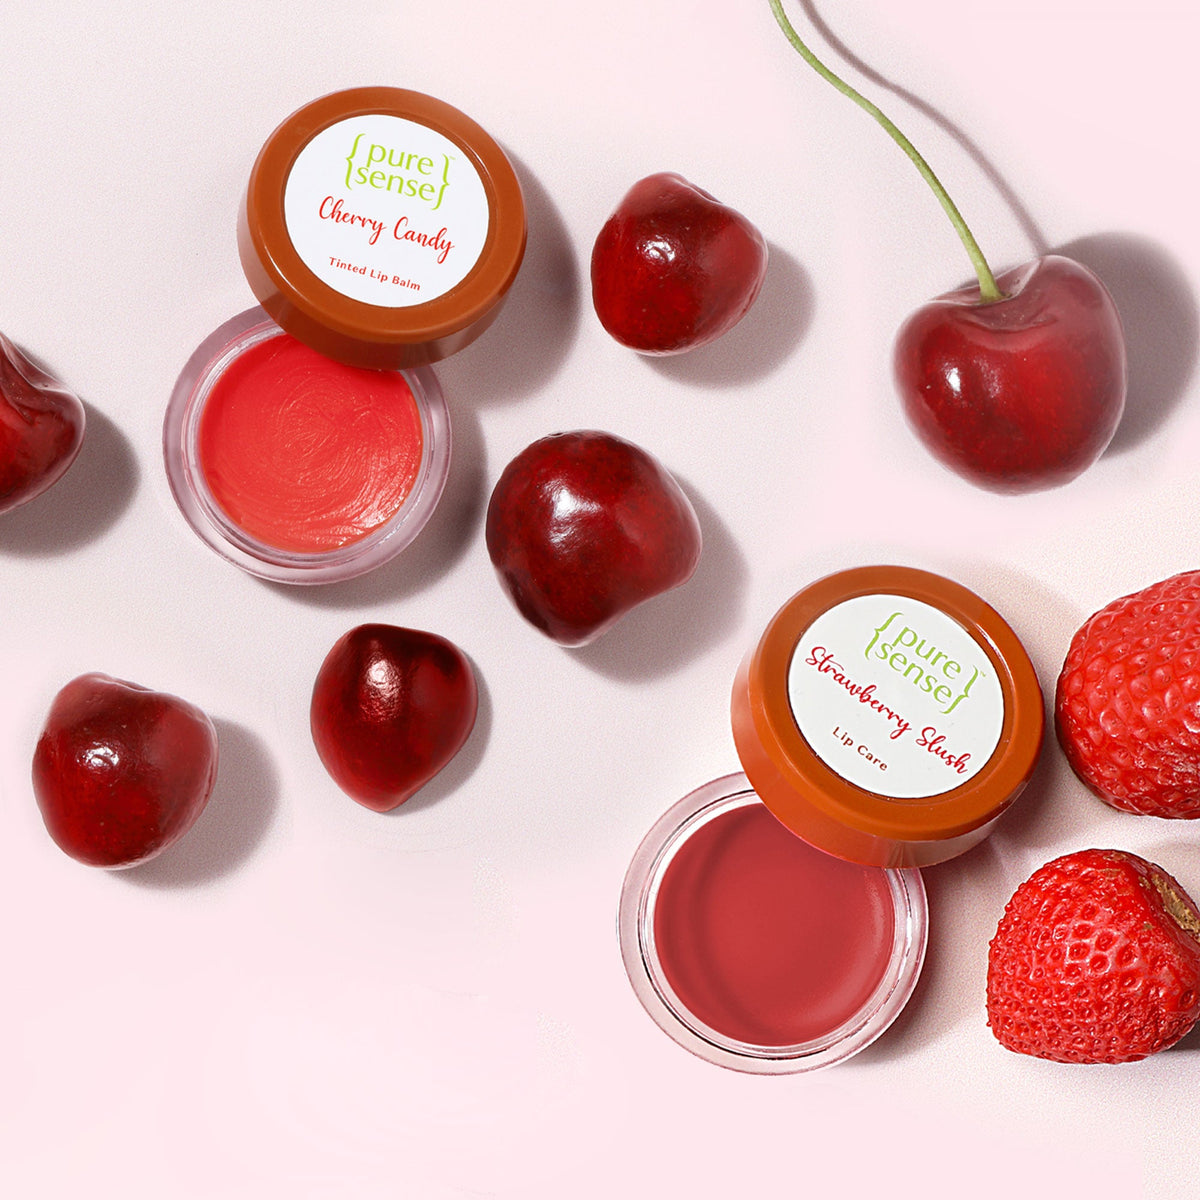 [CRED] Cherry Candy Tinted Lip Balm 5ml +  Strawberry Slush Lip Balm 5m | Pack of 2 | From the makers of Parachute Advansed | 10ml